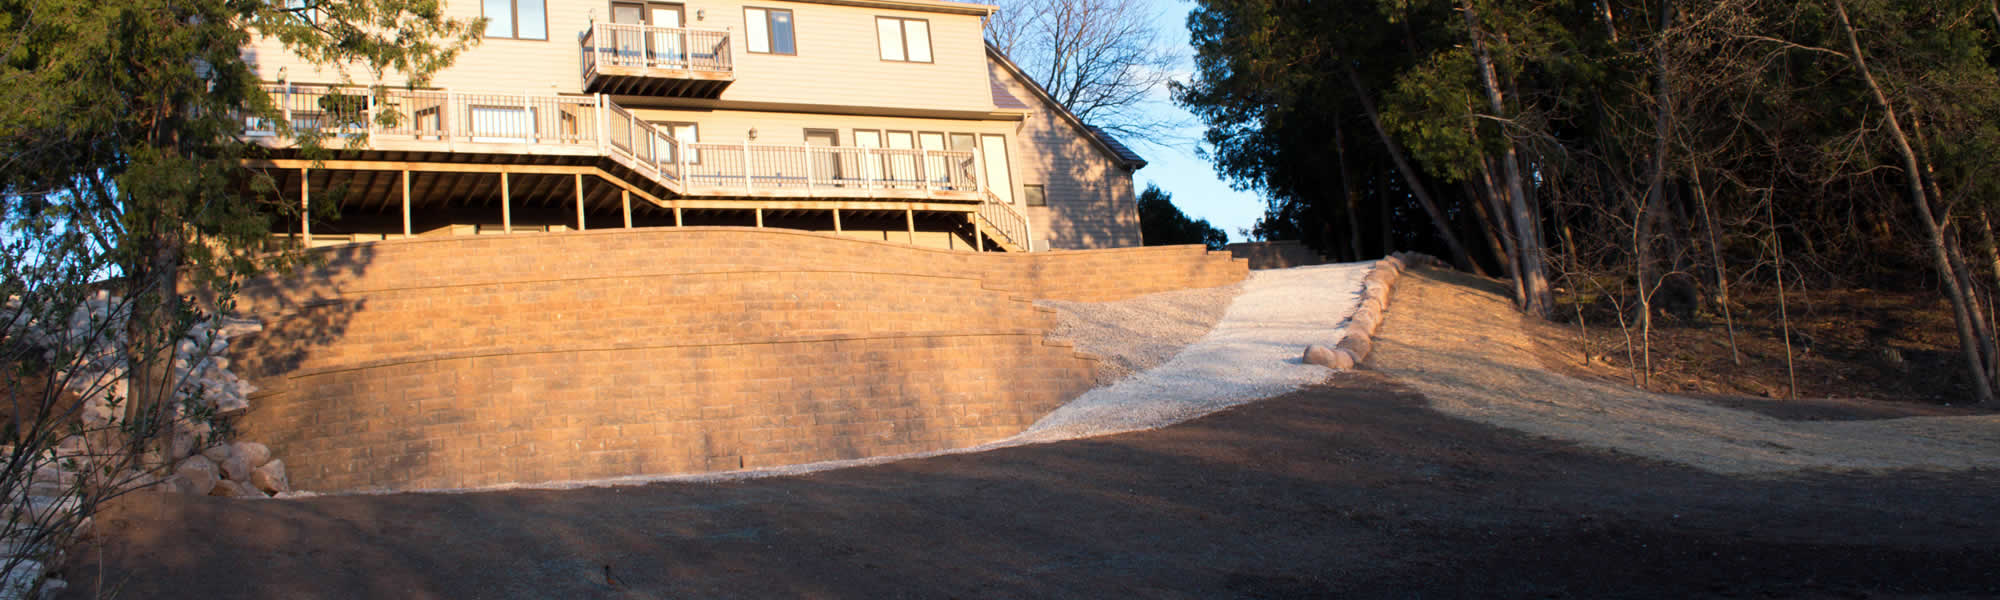 Wrightstown Retaining Wall Installation Services near me